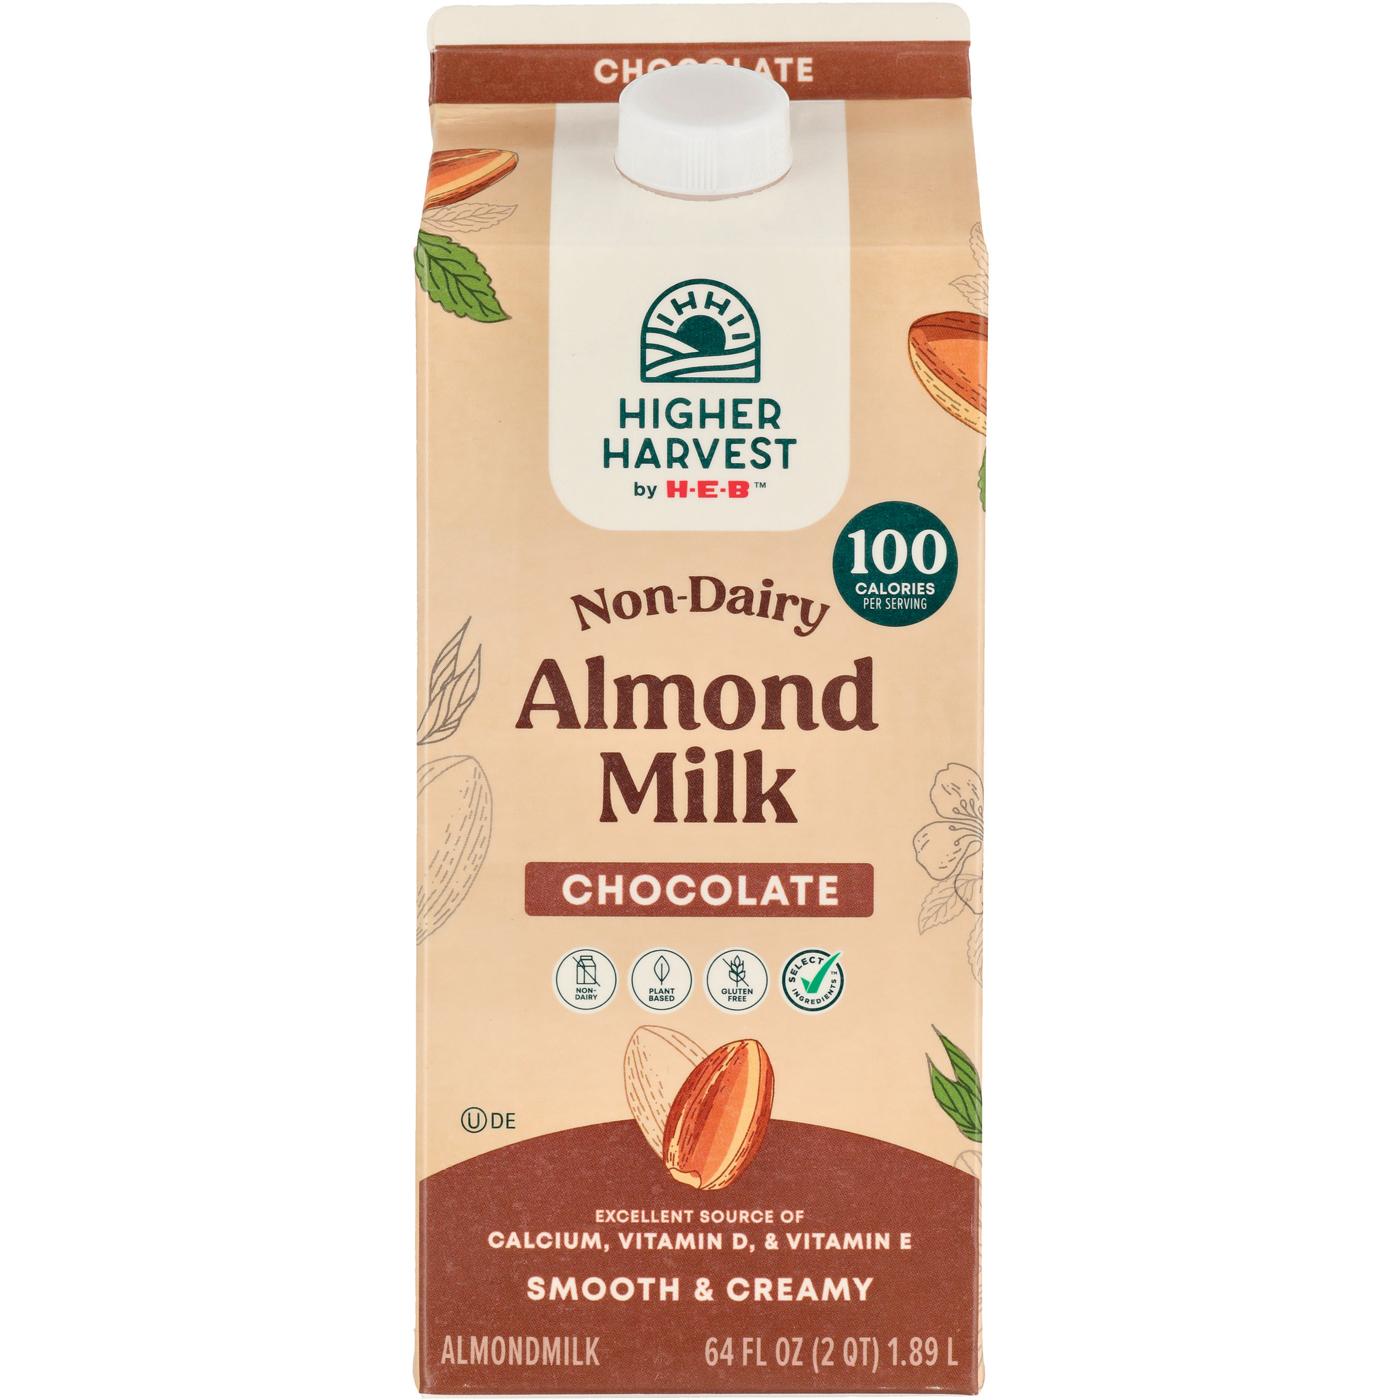 Higher Harvest by H-E-B Non-Dairy Almond Milk – Chocolate; image 1 of 2